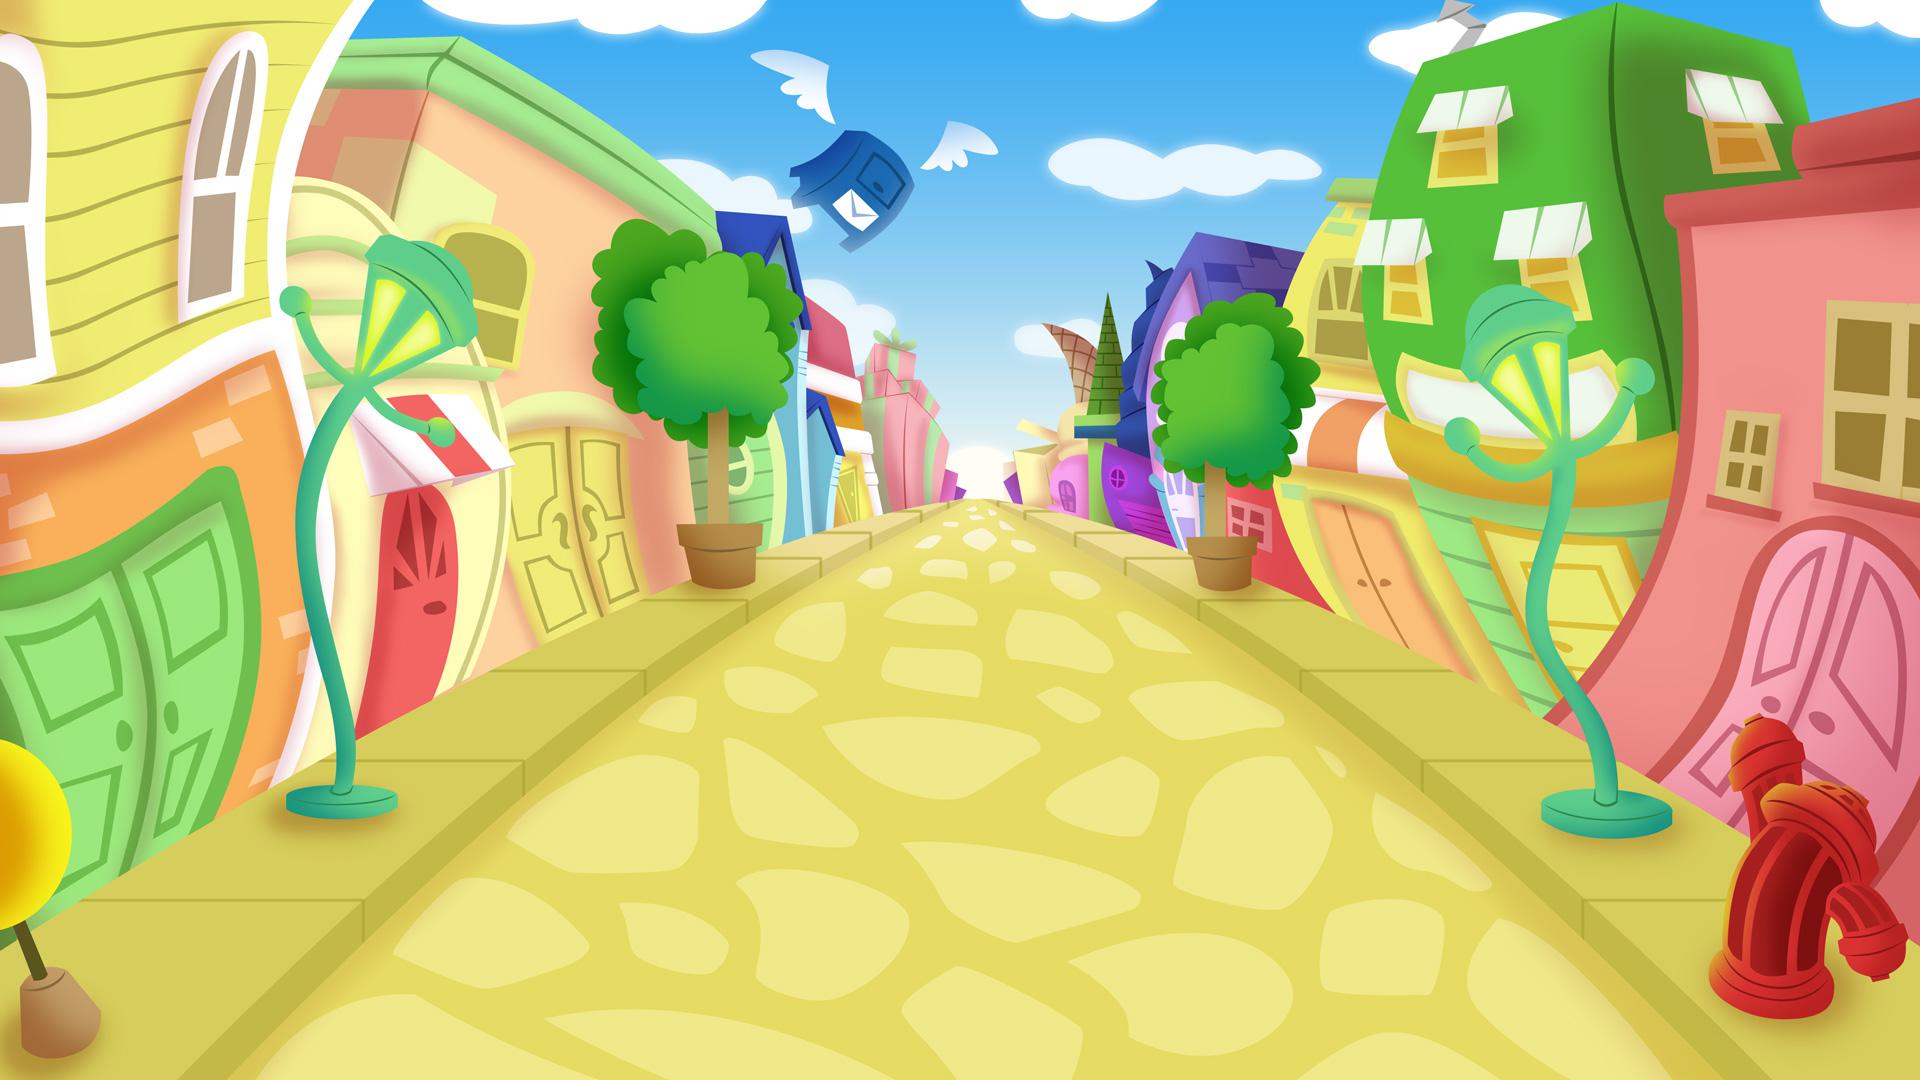 Toontown Wallpapers Group.